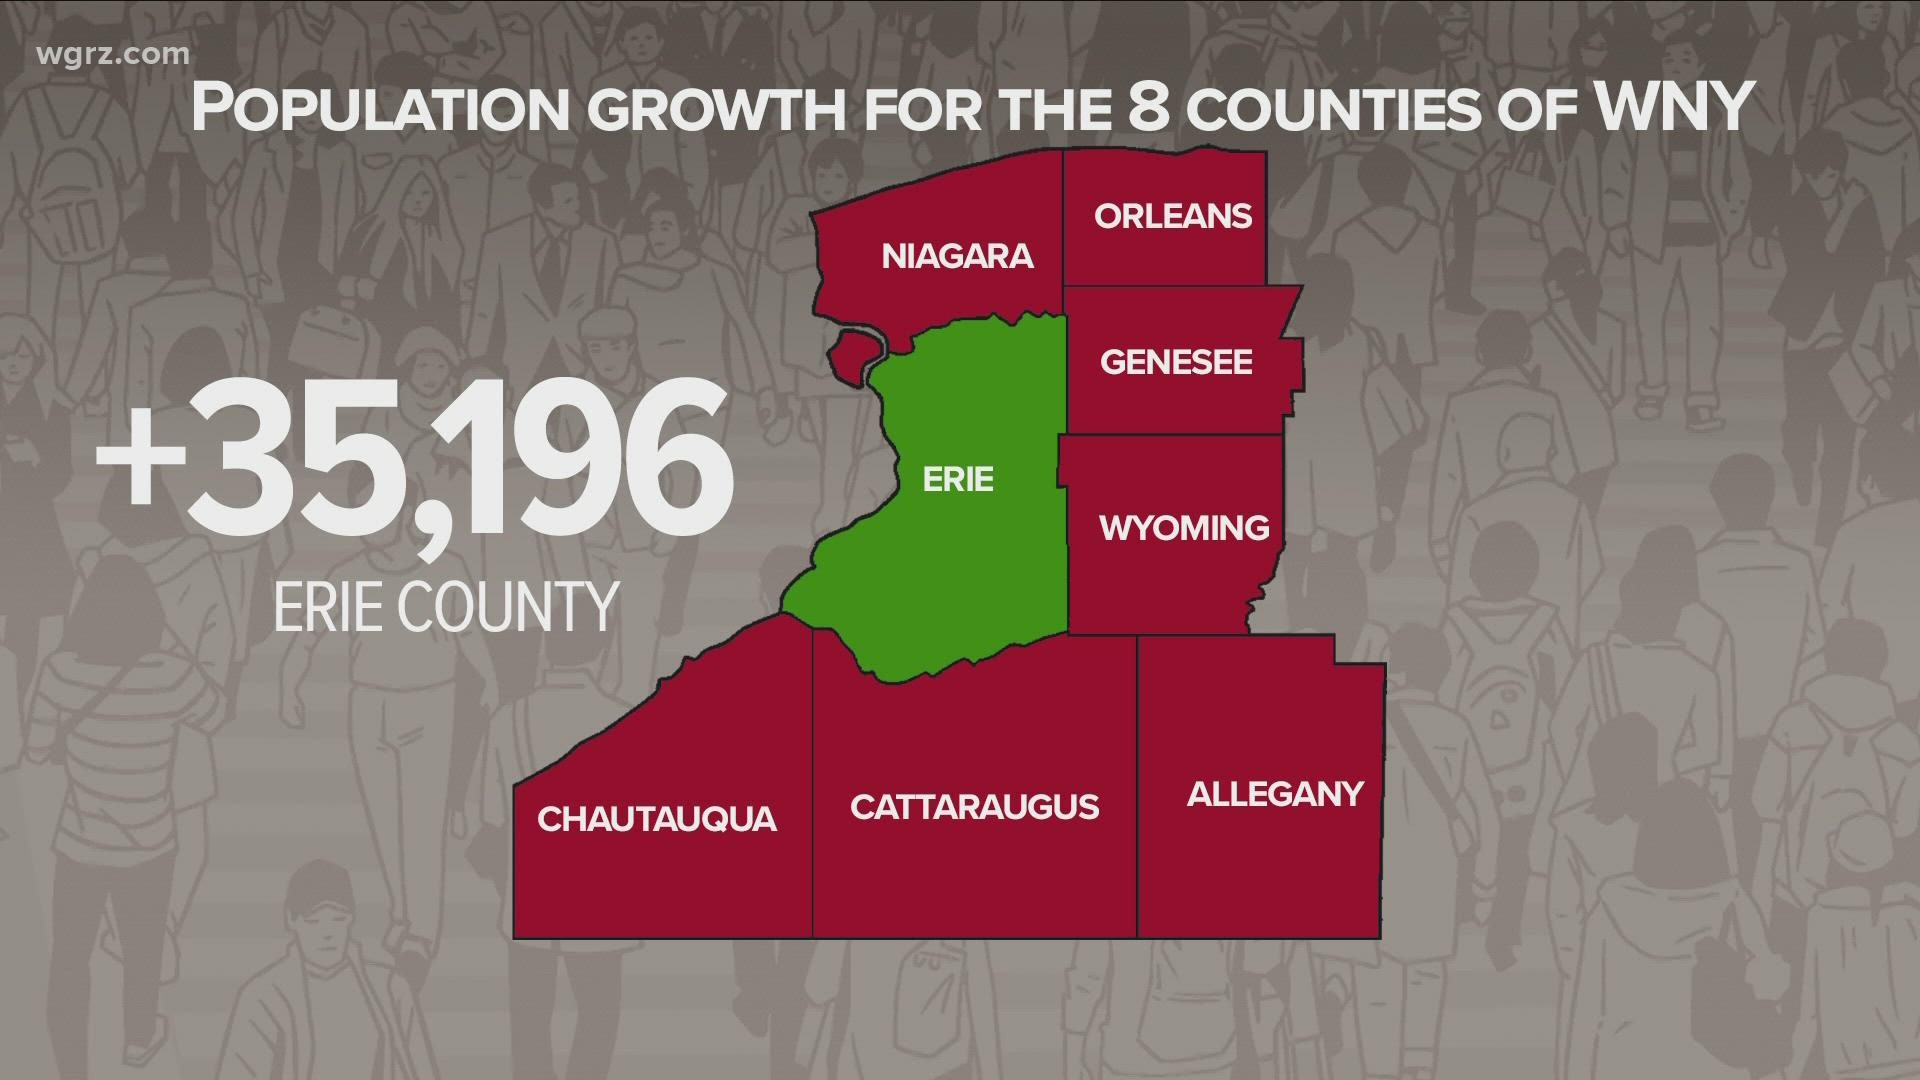 Erie County on its own grew by over 35-thousand people in the last decade making up for those other losses.